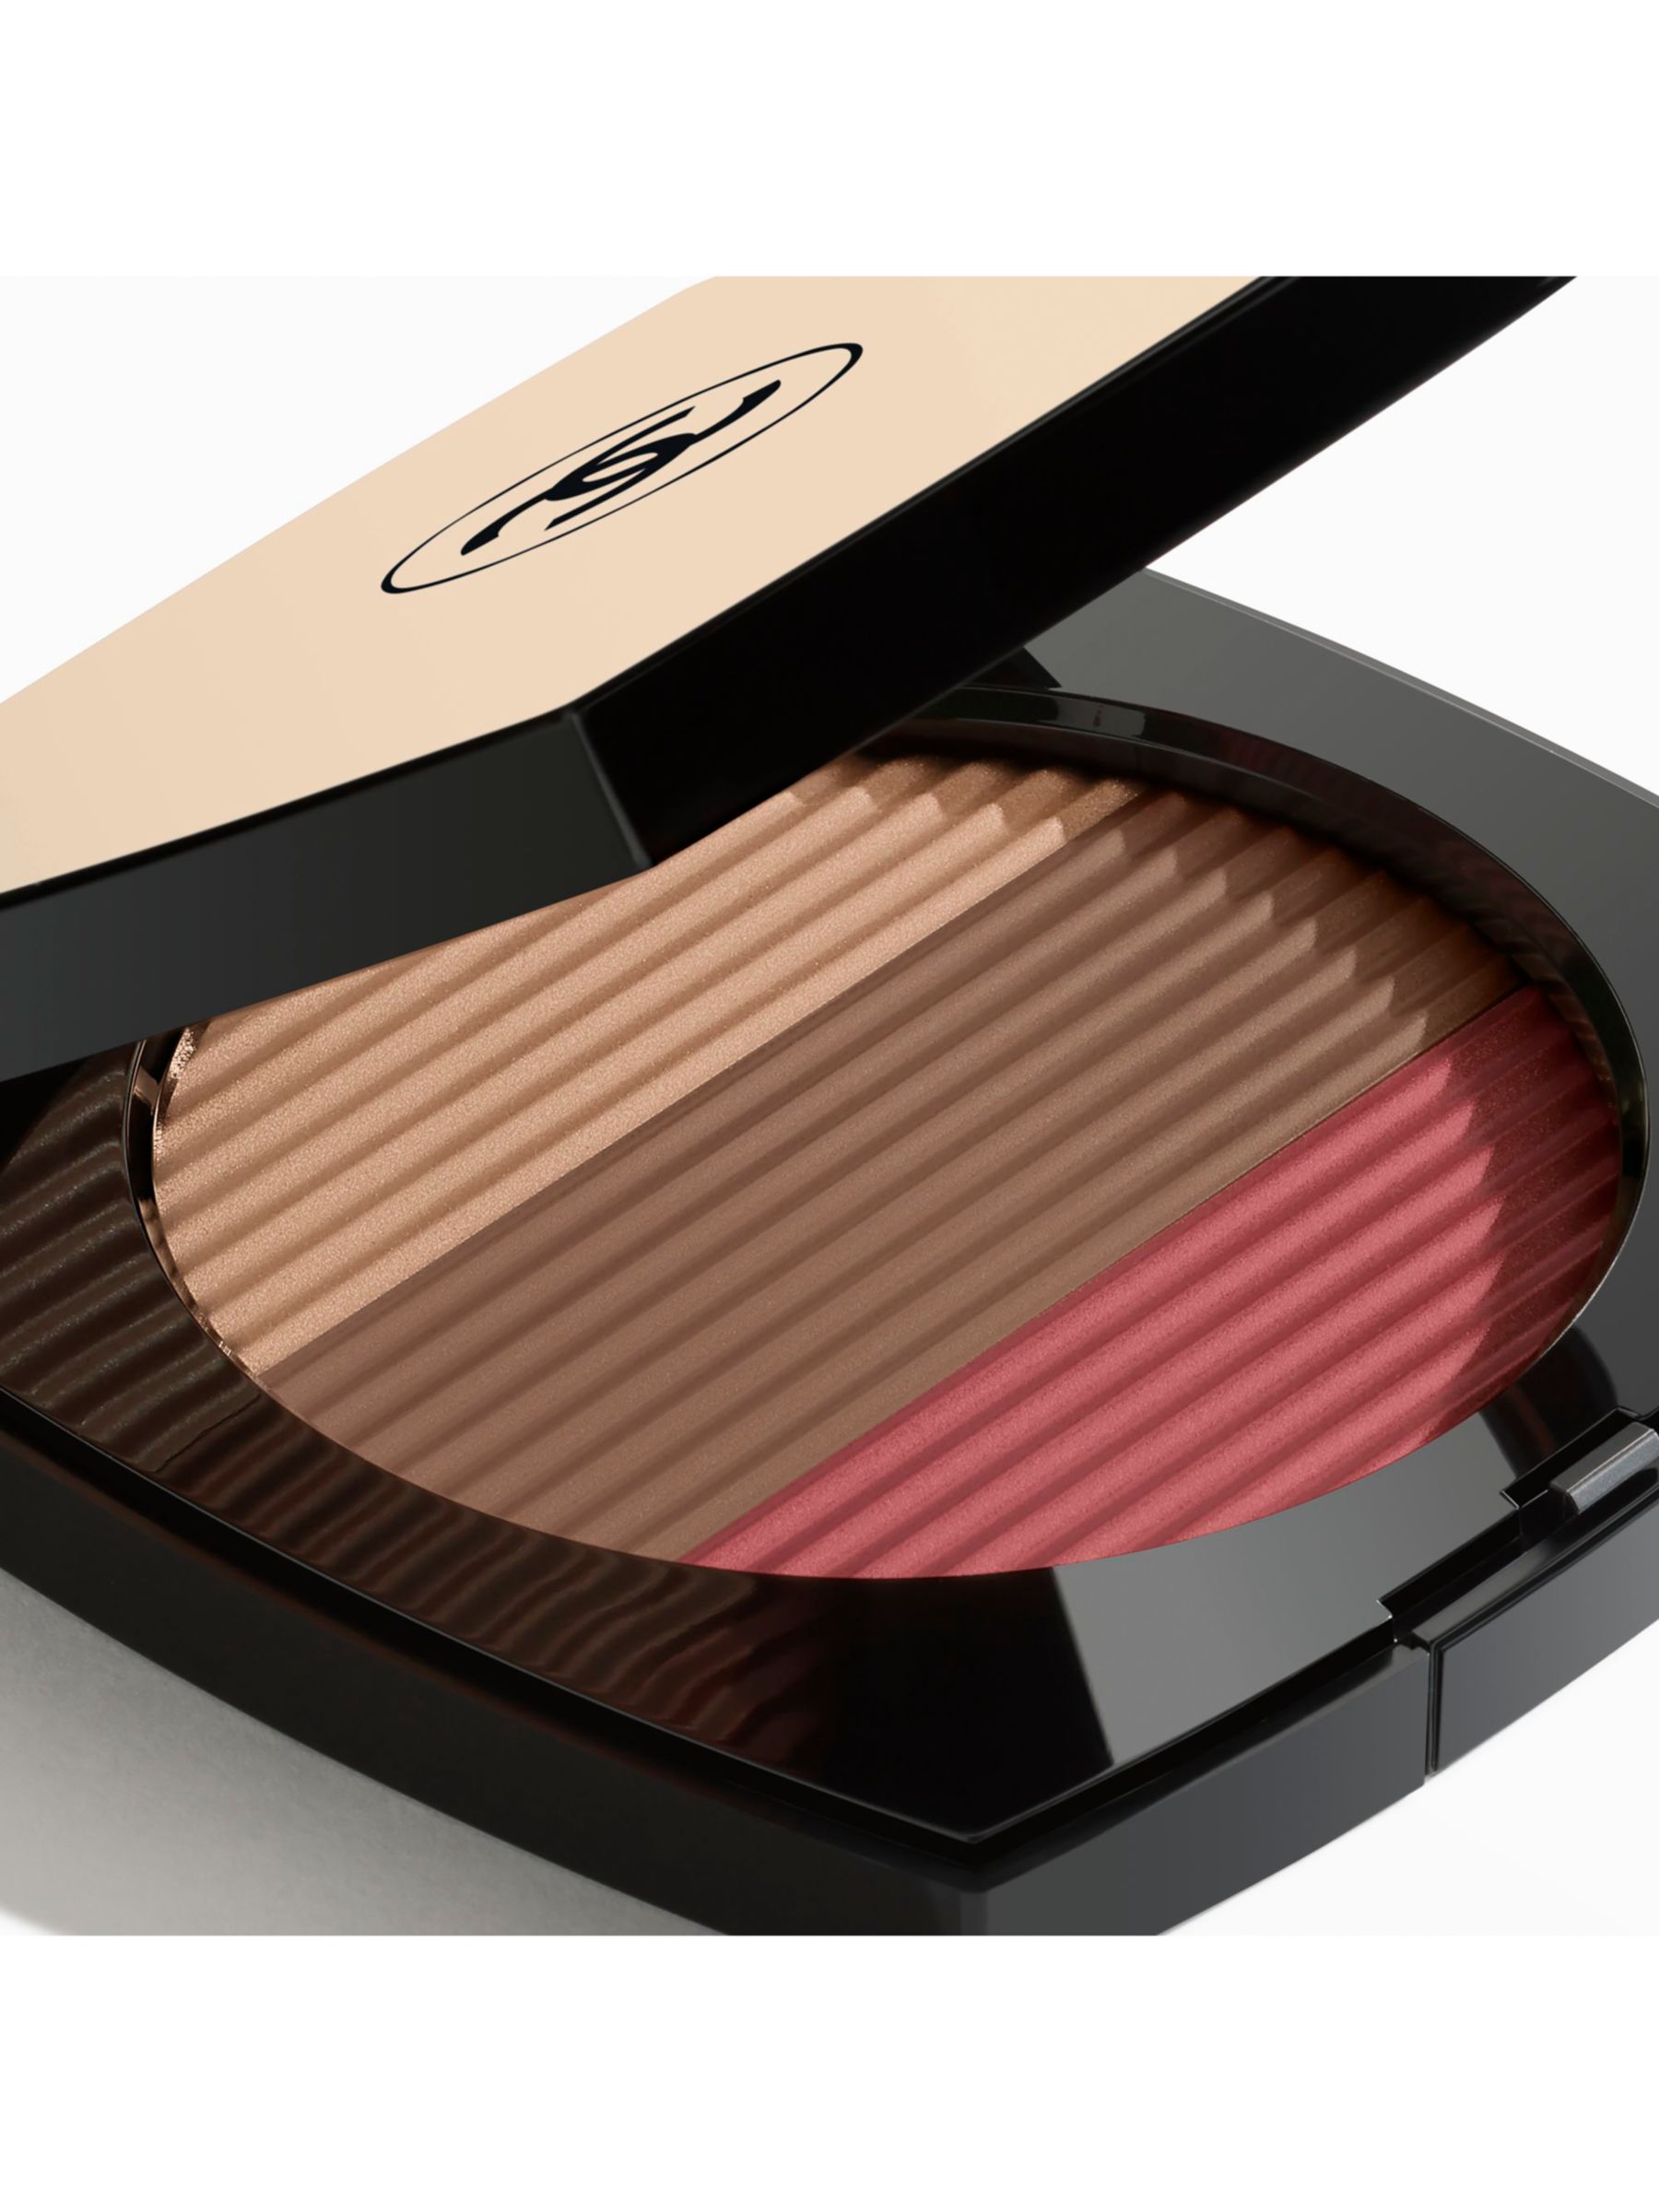 CHANEL Les Beiges Healthy Glow Sun-Kissed Powder, Deep Rose Gold 2